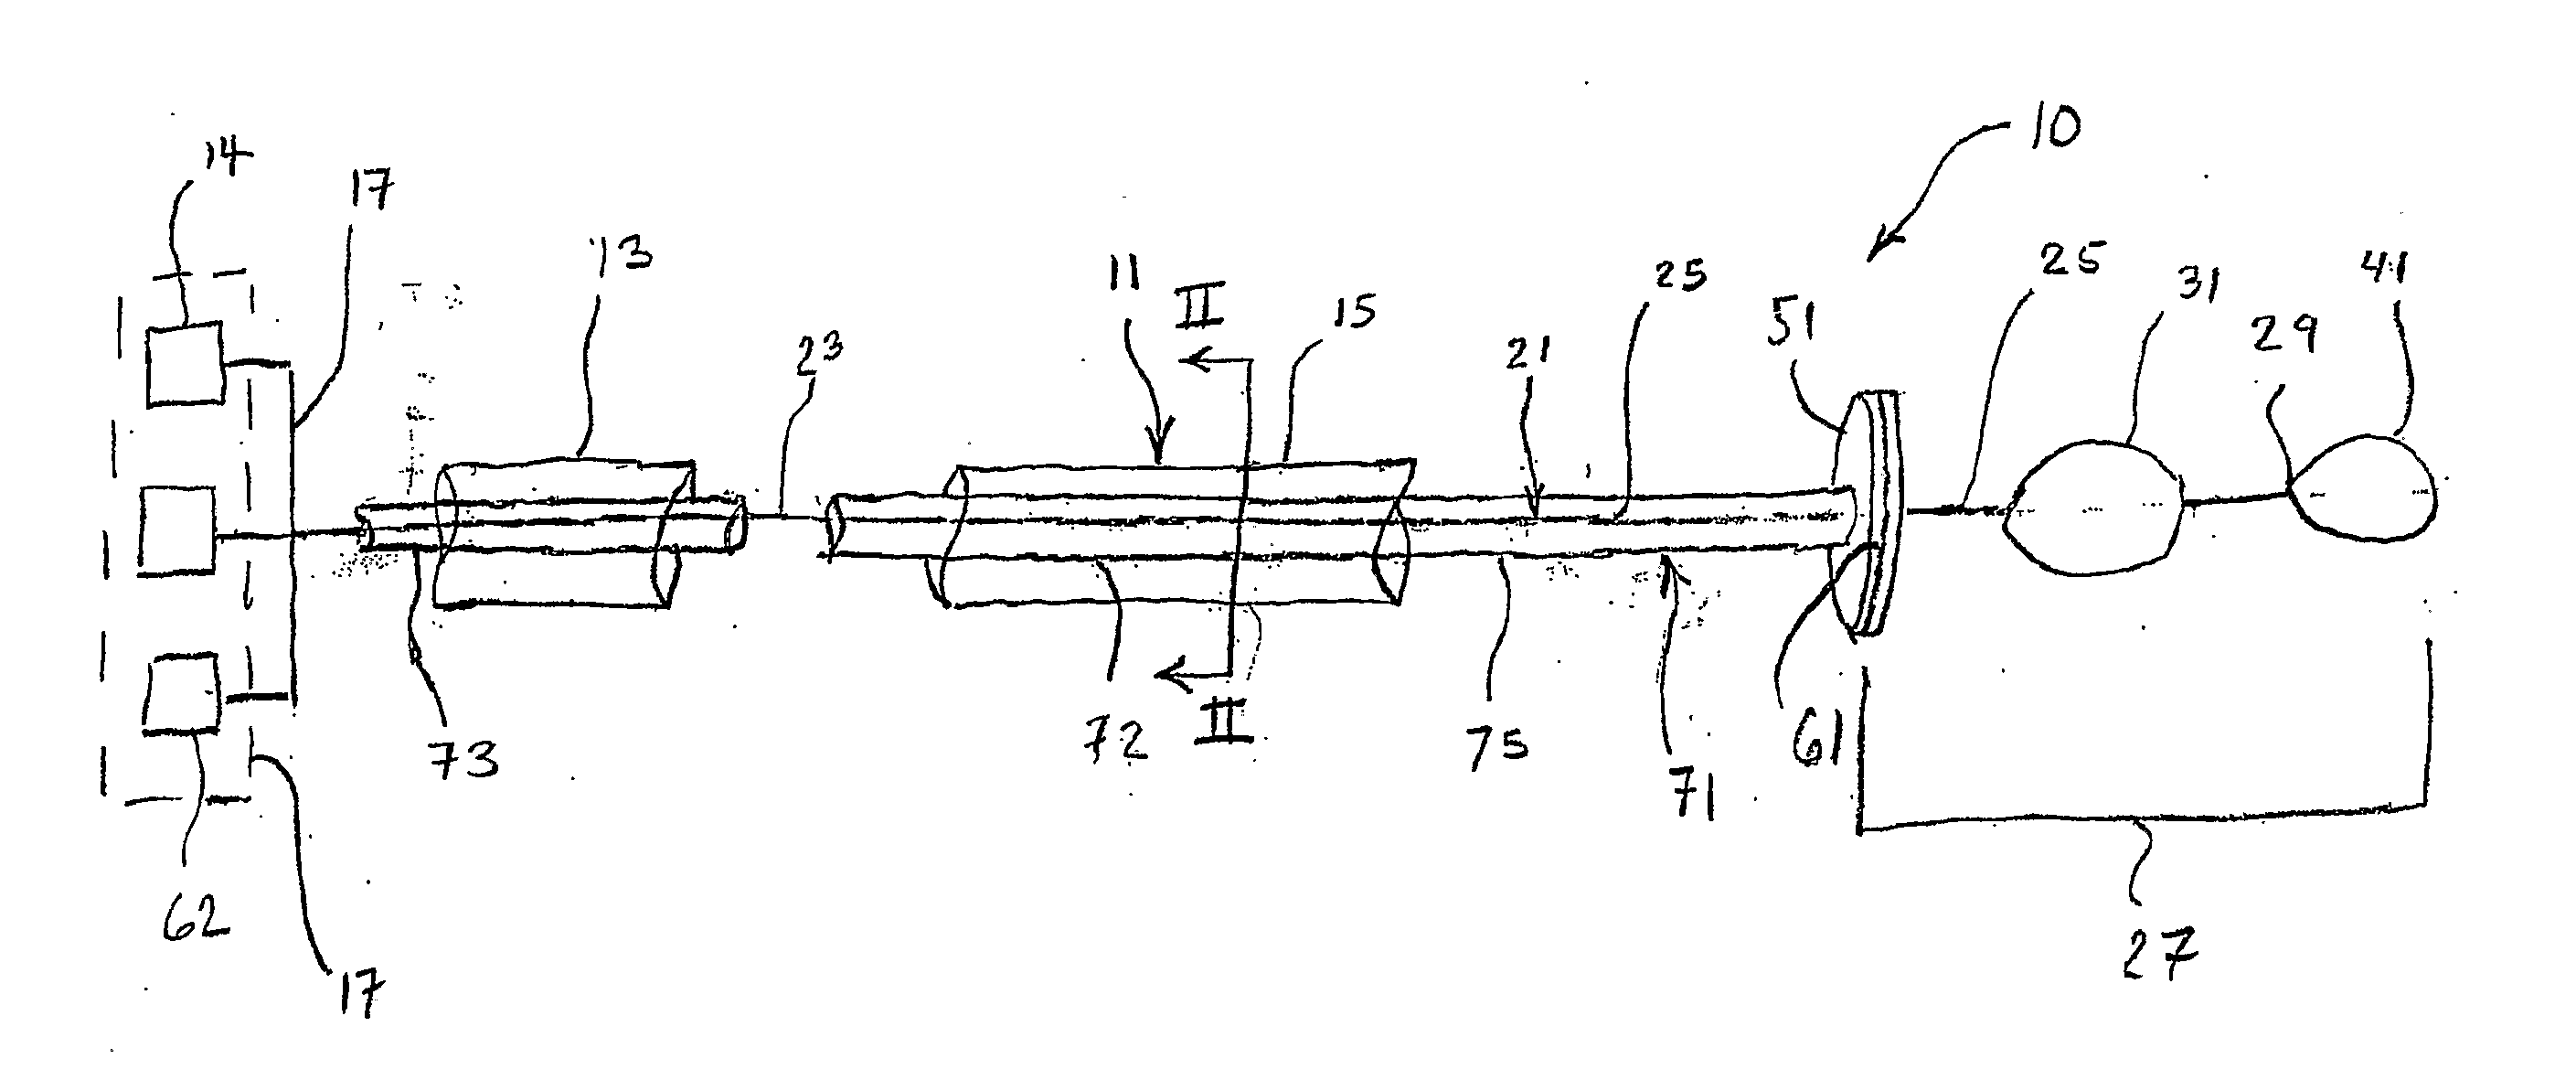 Circumferential ablation guide wire system and related method of using the same